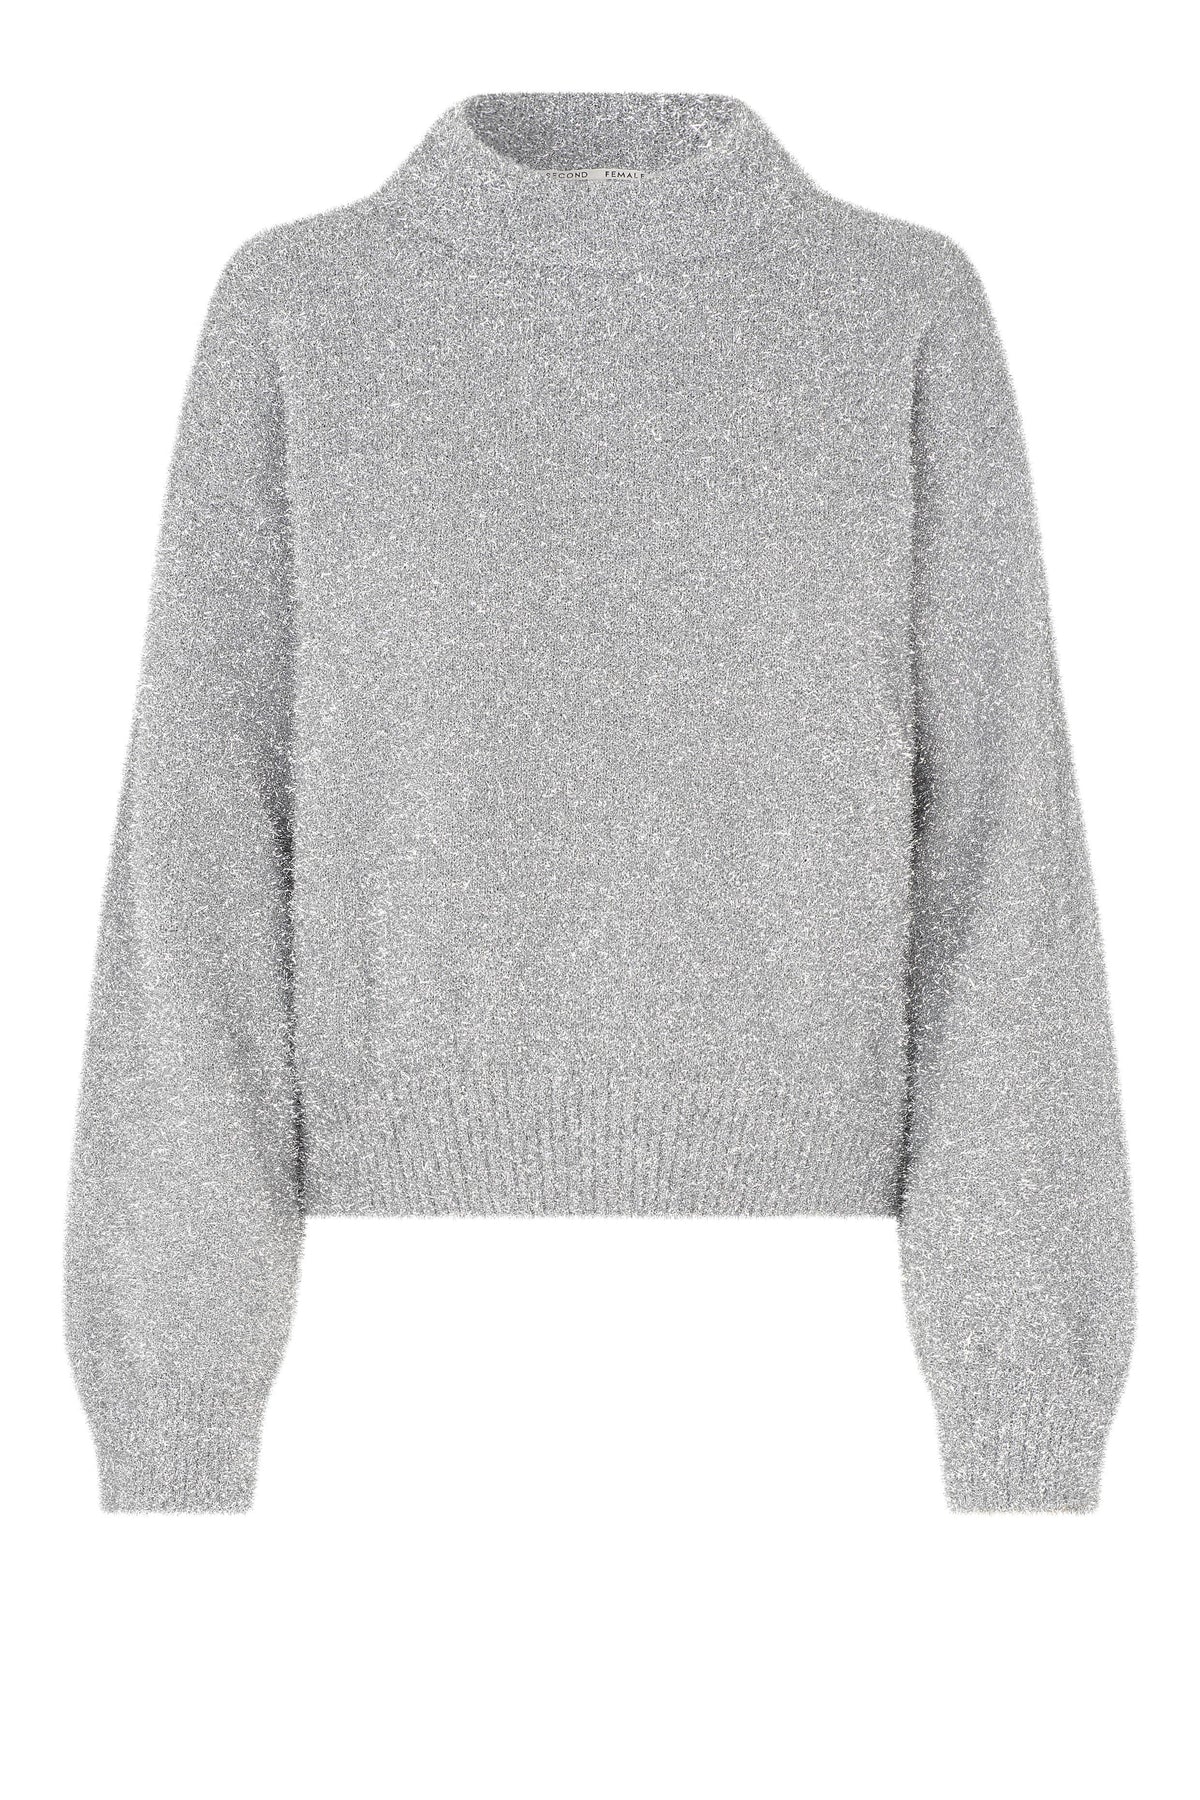 Silver knitted crew neck relaxed fit jumper